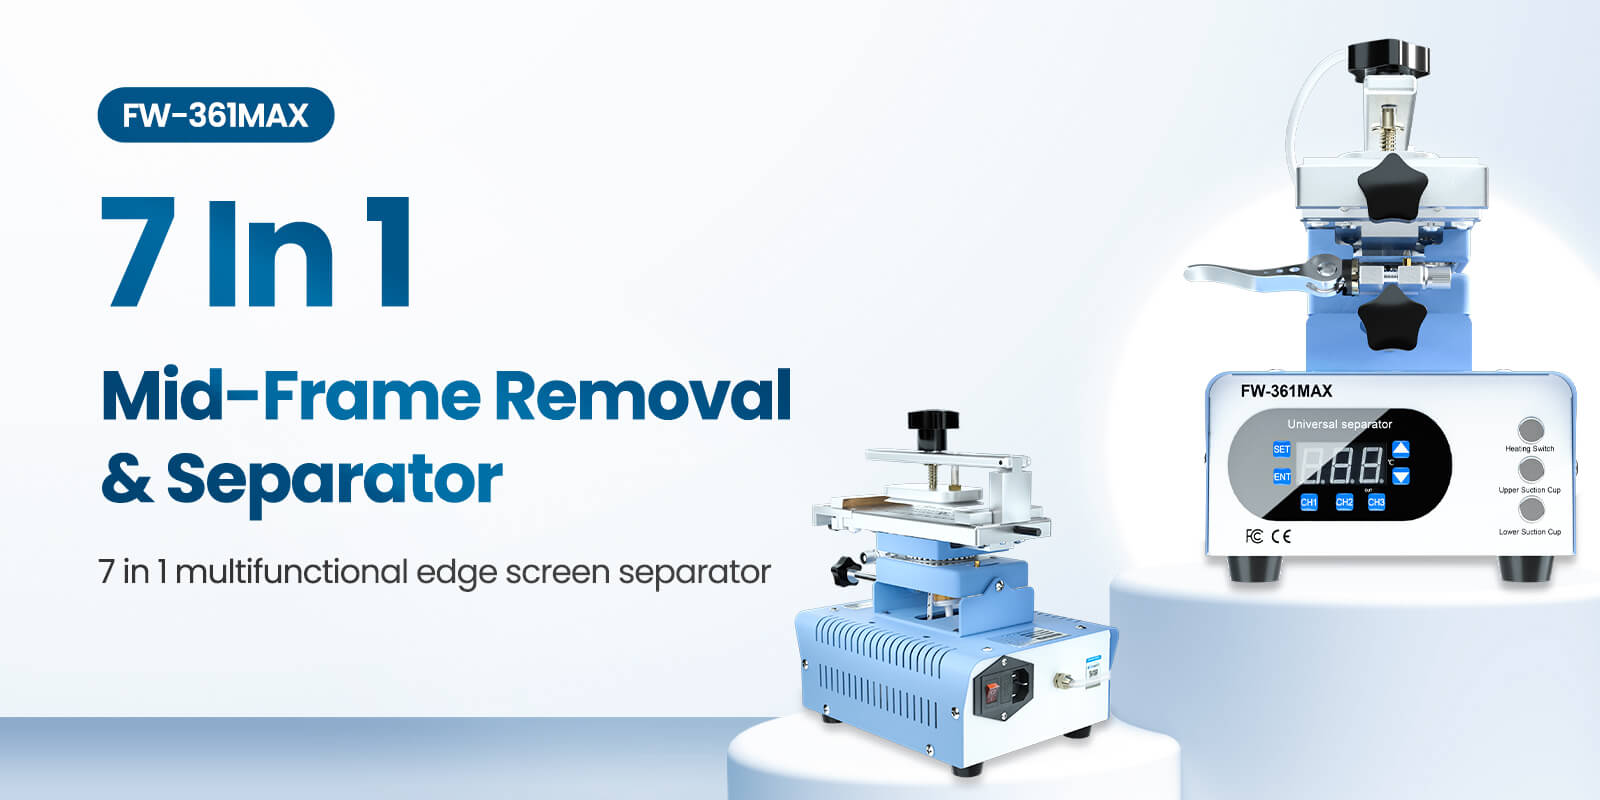 FORWARD-FW-361max-7-In-1-Mid-Frame-Removal-&-Separator-banner